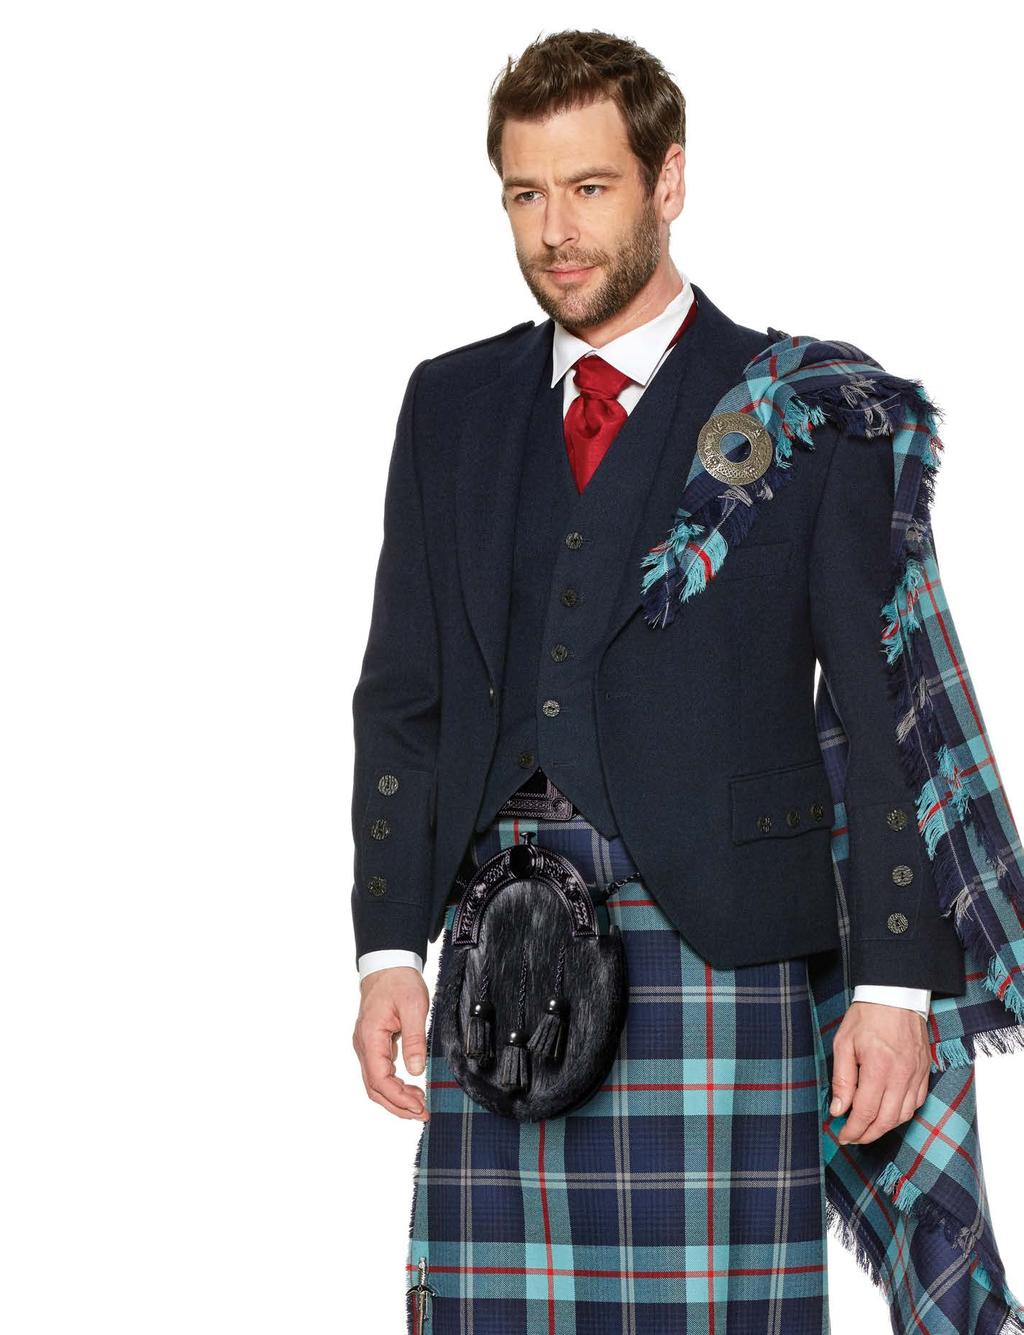 Shirt, Dark Cantle Sporran, Spirit of Bannockburn Tie and matching Hankie 4 from the rental price of each kilt will be